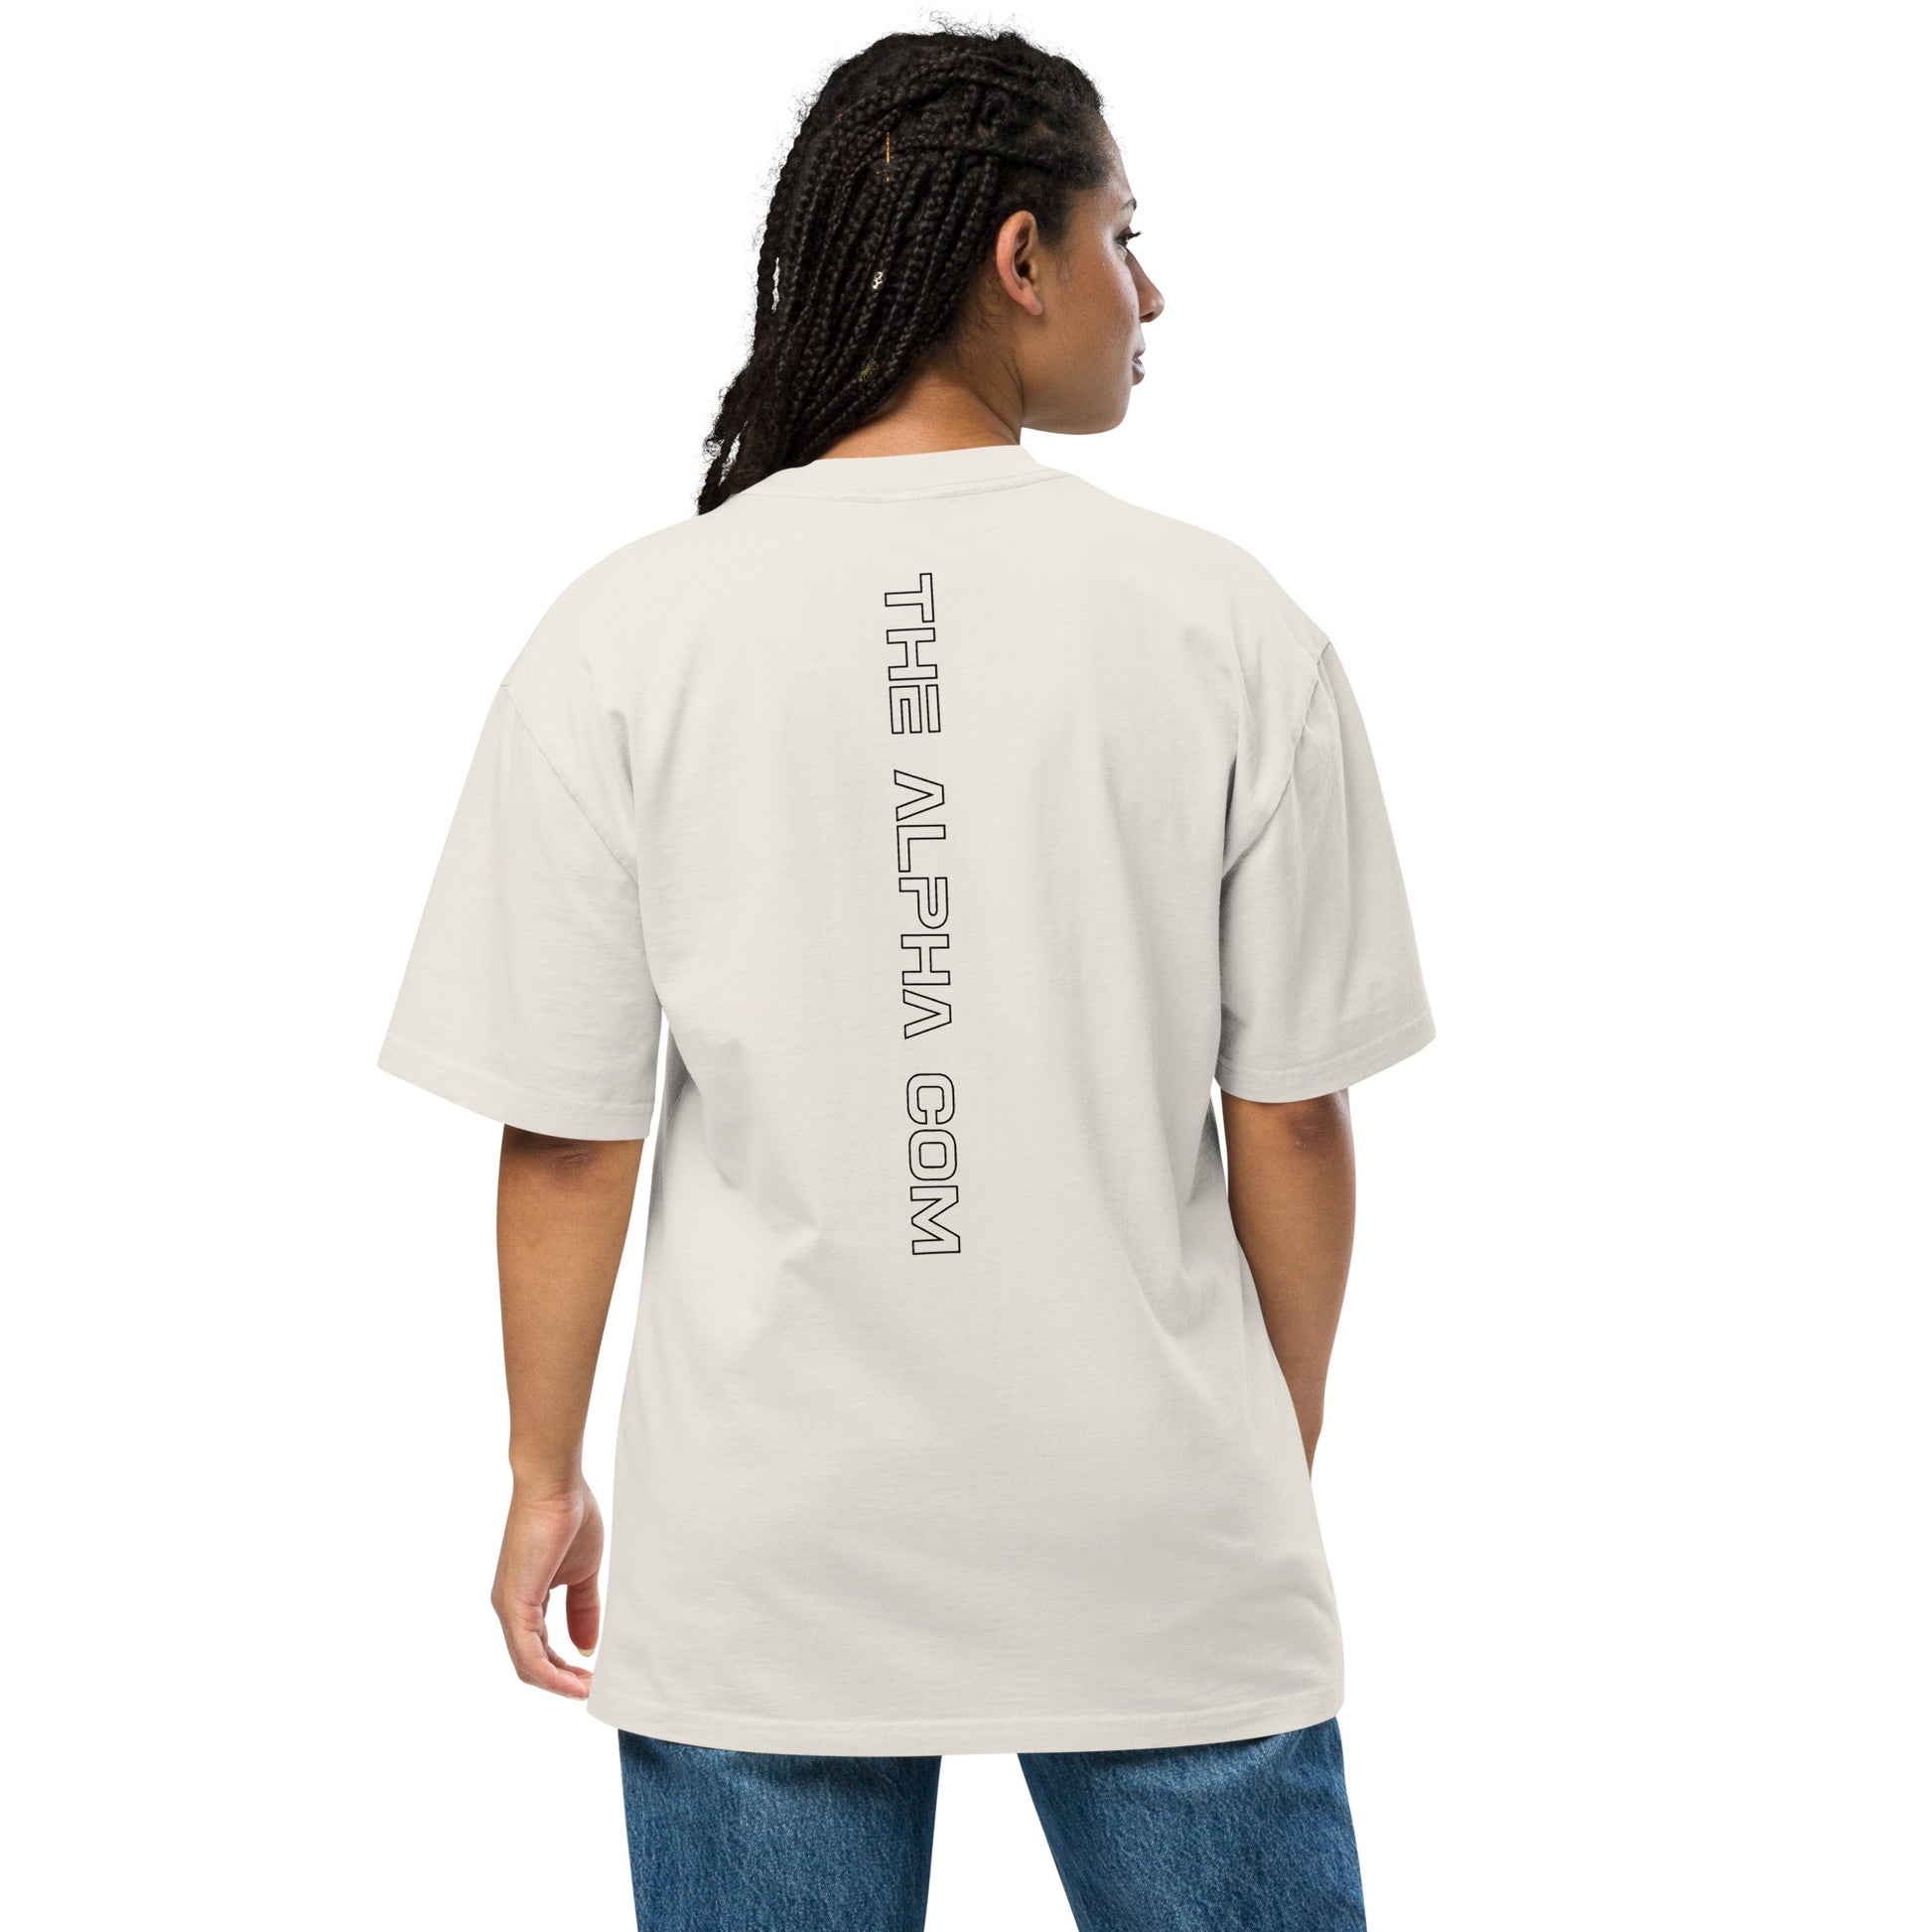 THE ALPHA COM ® TYM Oversized faded t-shirt - THE ALPHA